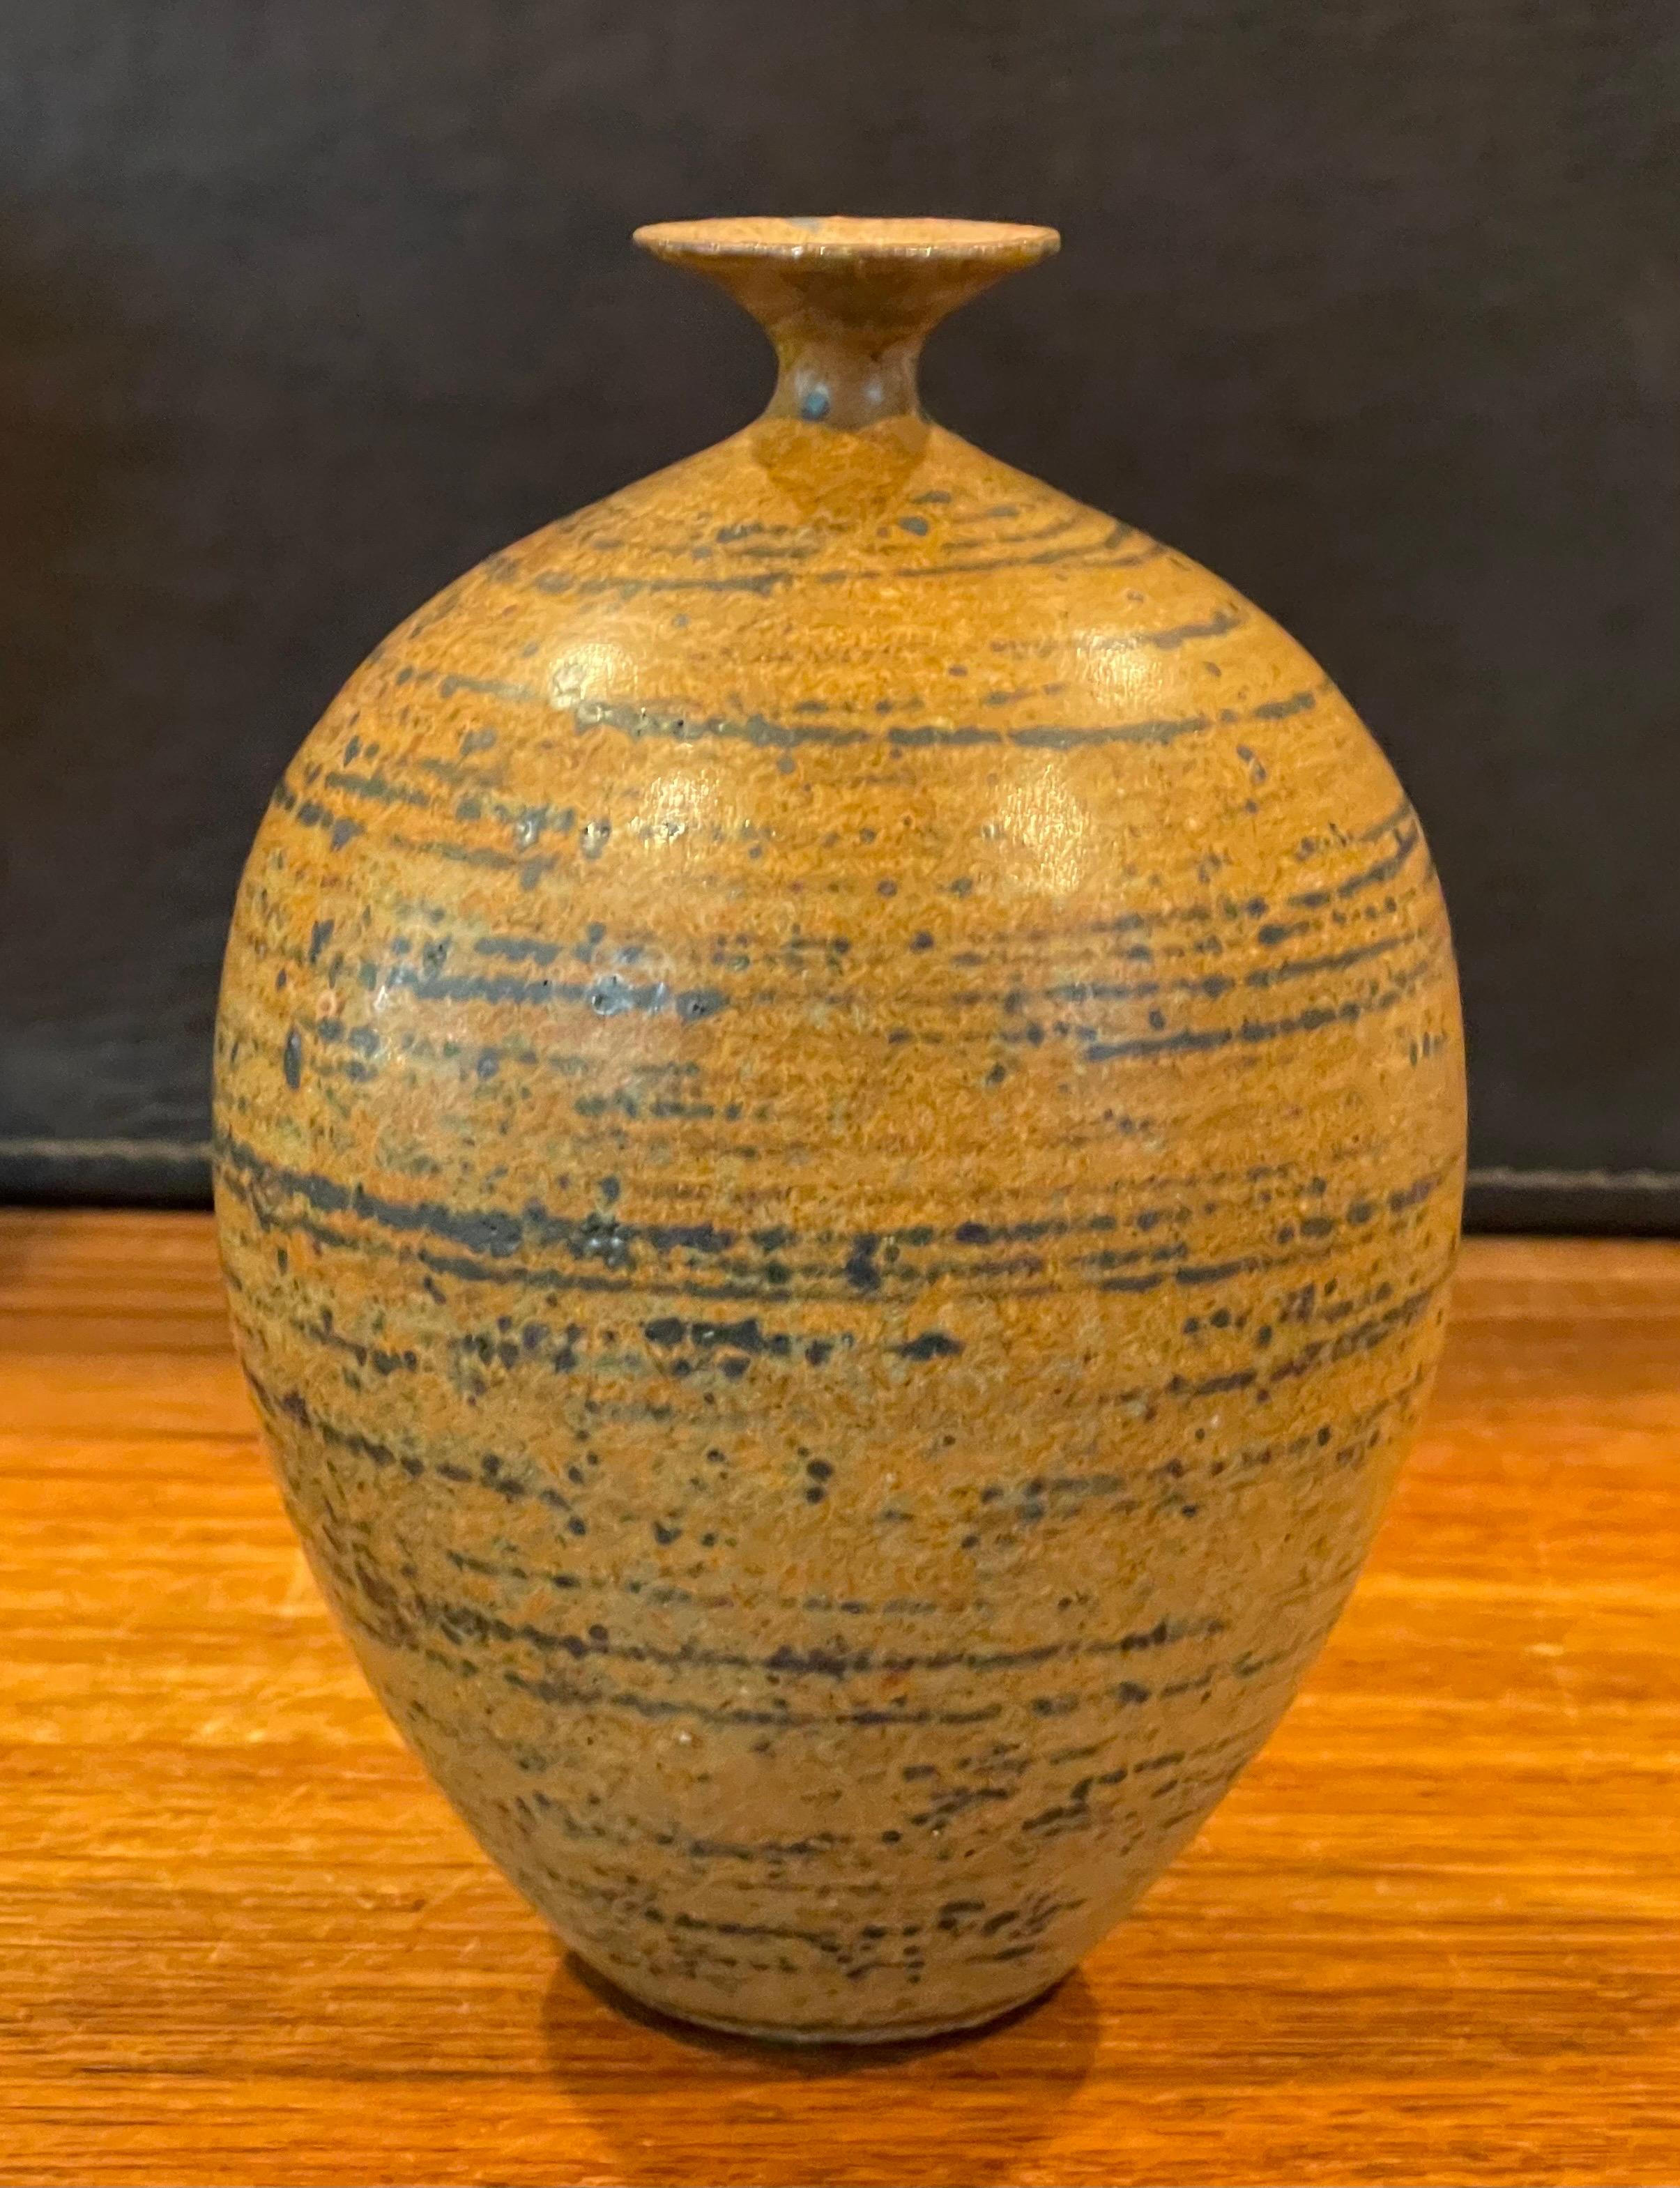 California Design Stoneware Weed Pot / Vase by Wayne Chapman In Good Condition For Sale In San Diego, CA